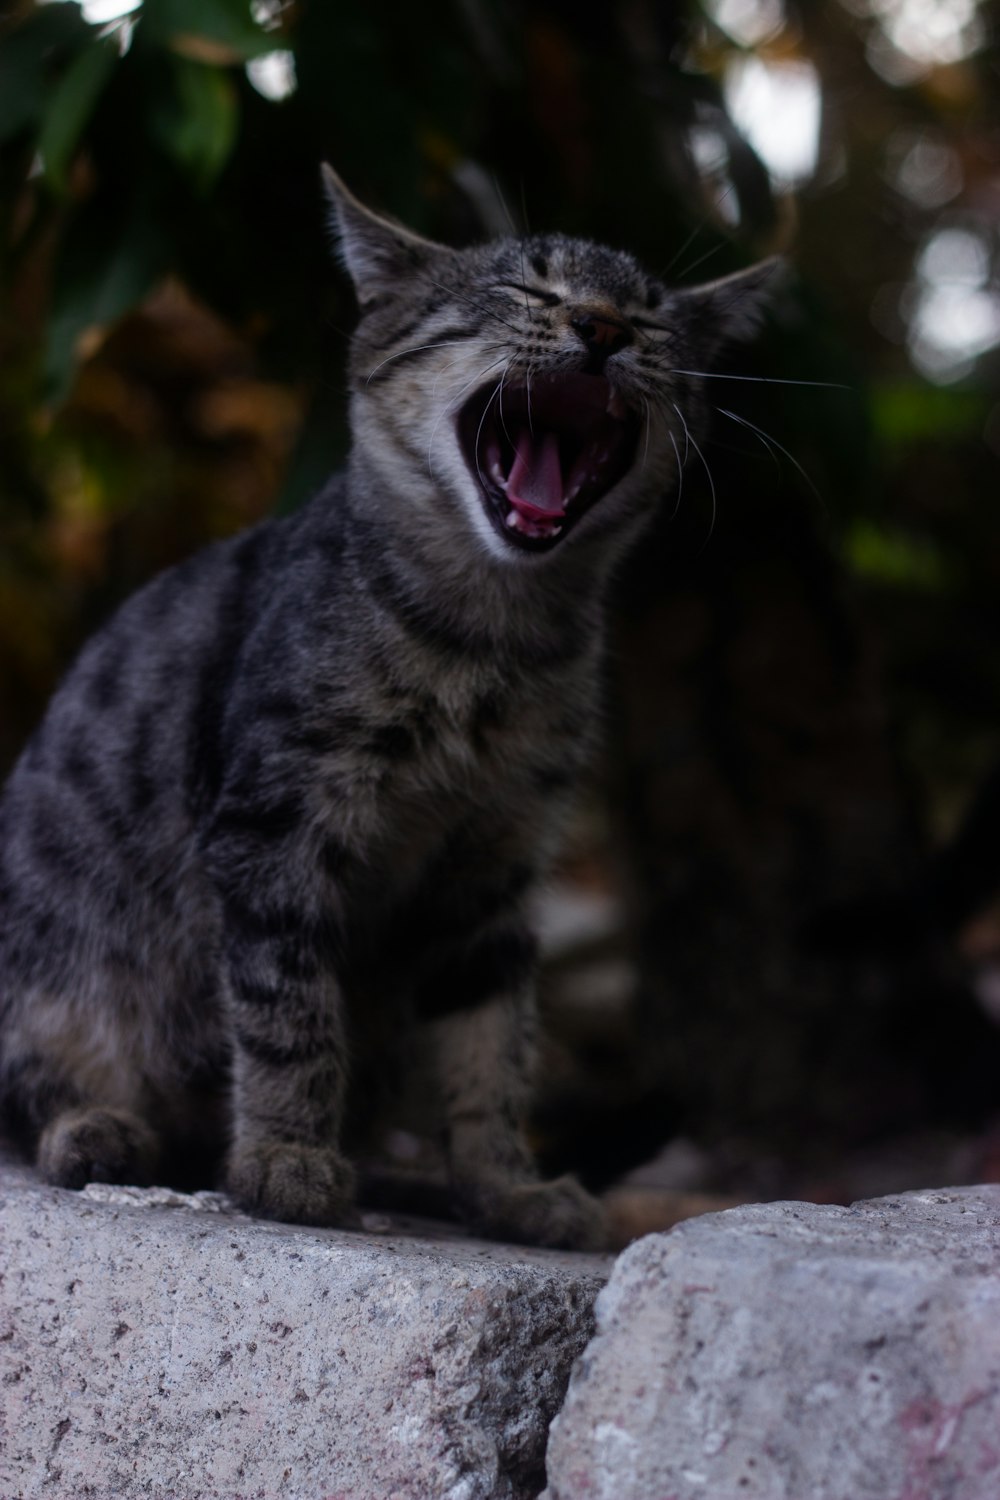 a cat yawns while sitting on a rock